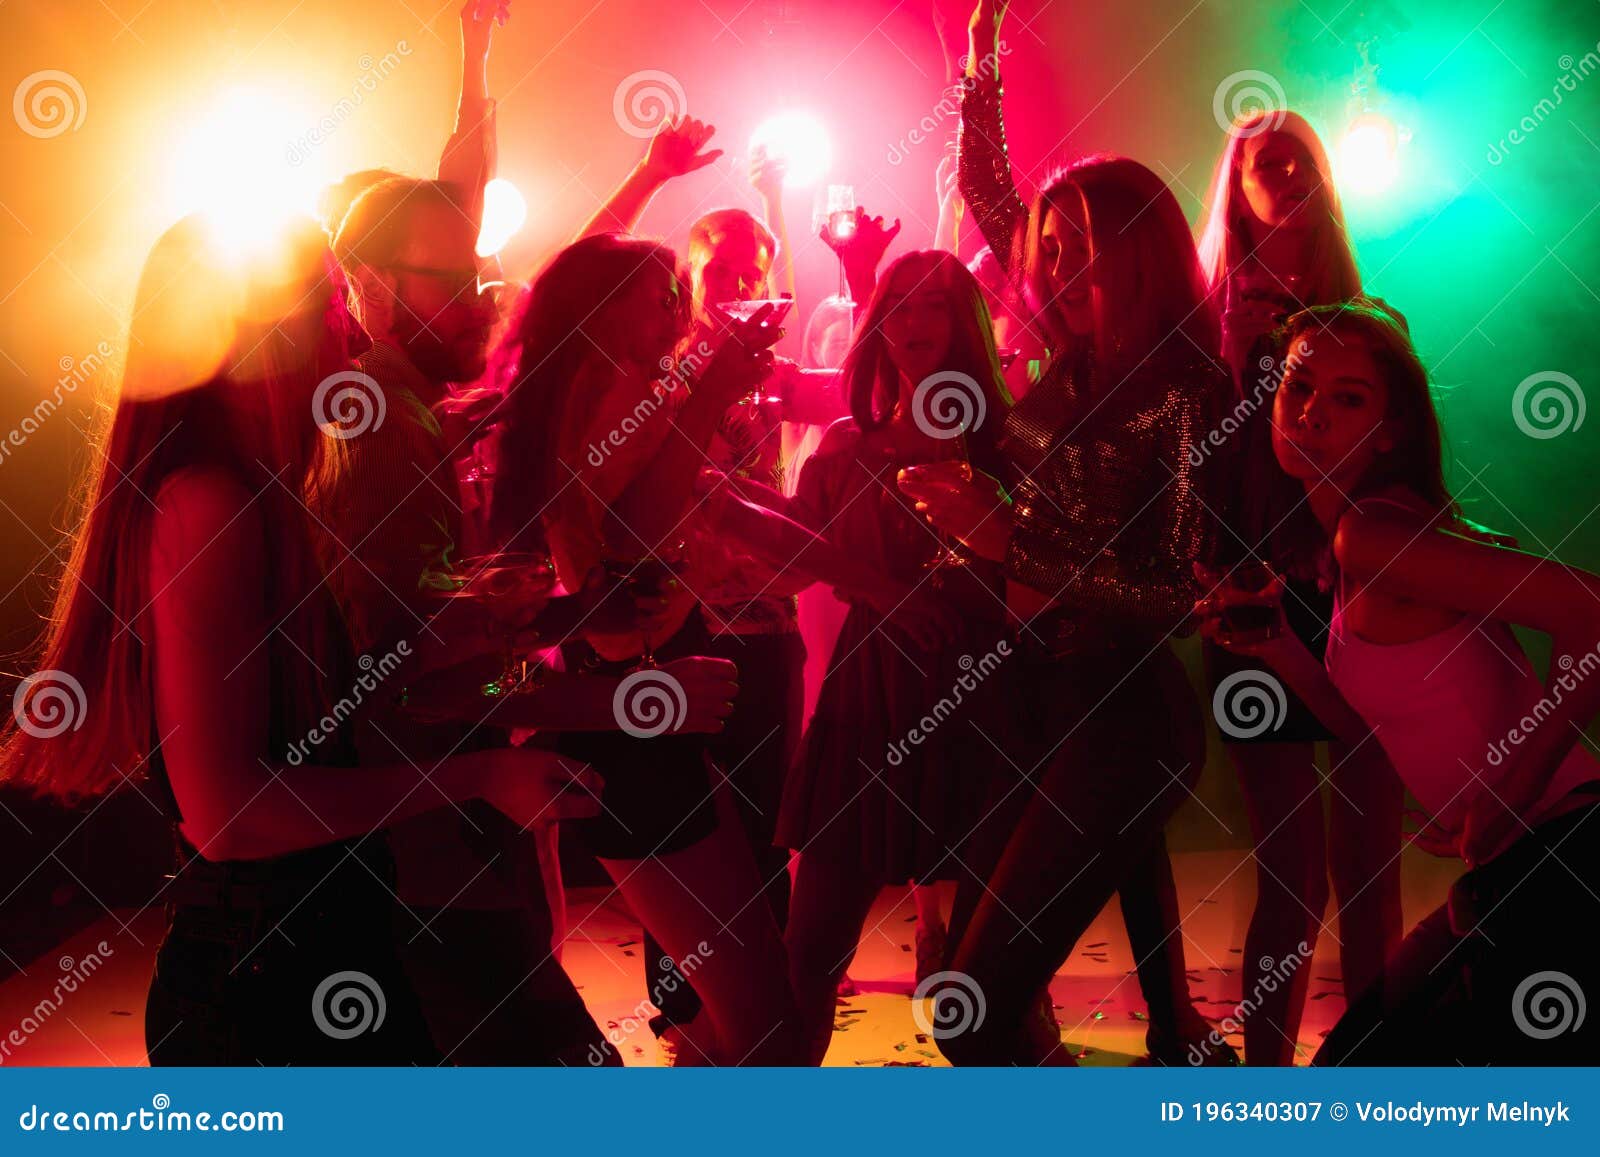 A Crowd Of People In Silhouette Raises Their Hands On Dancefloor On ...